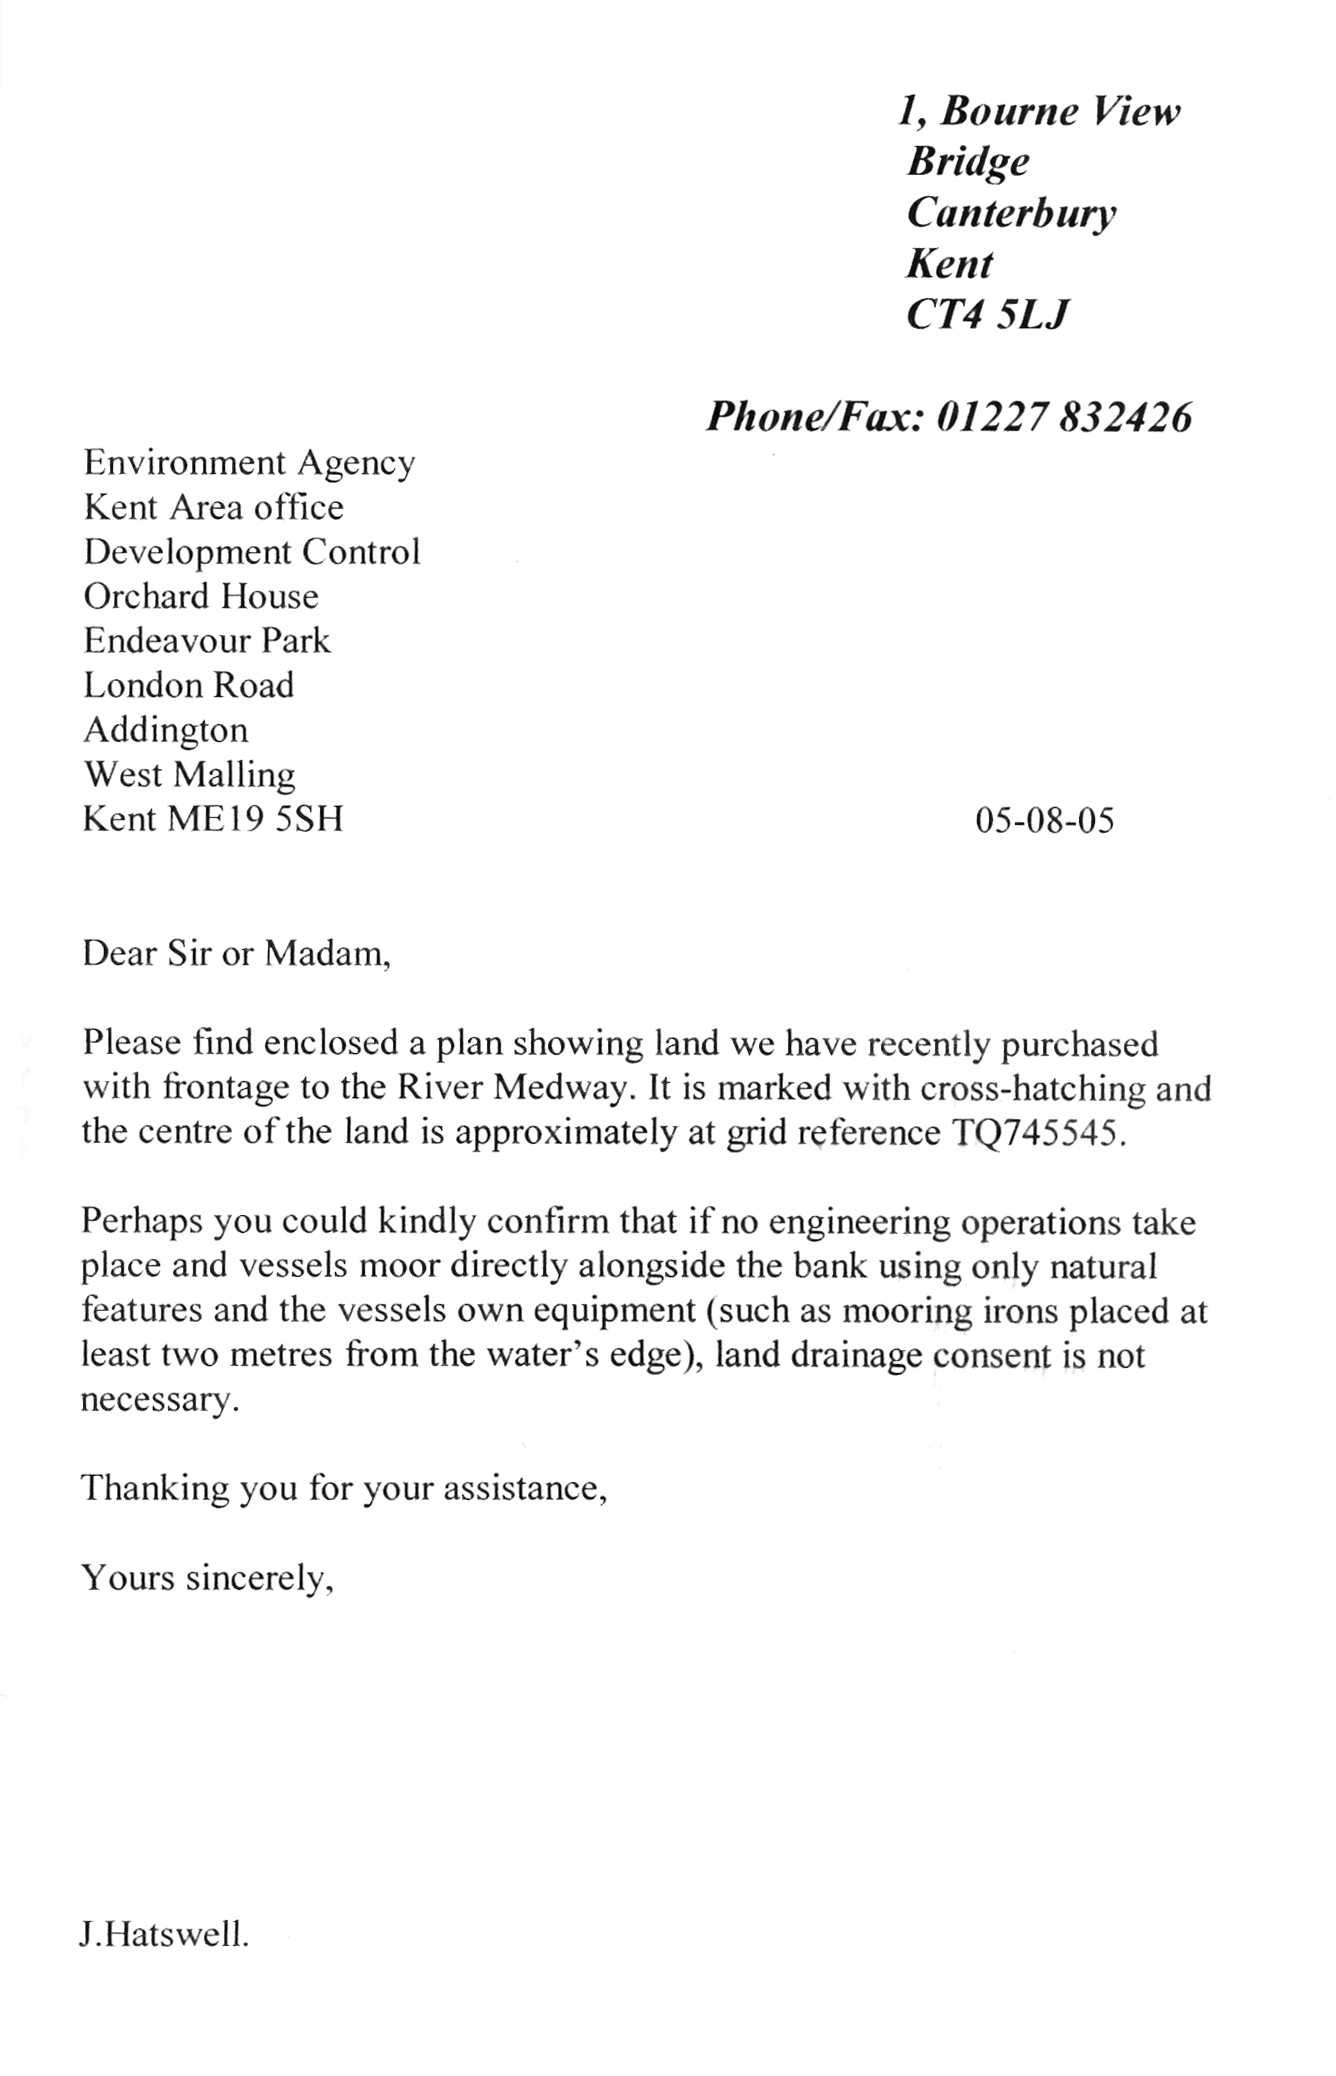 Letter from us to the Environment Agency